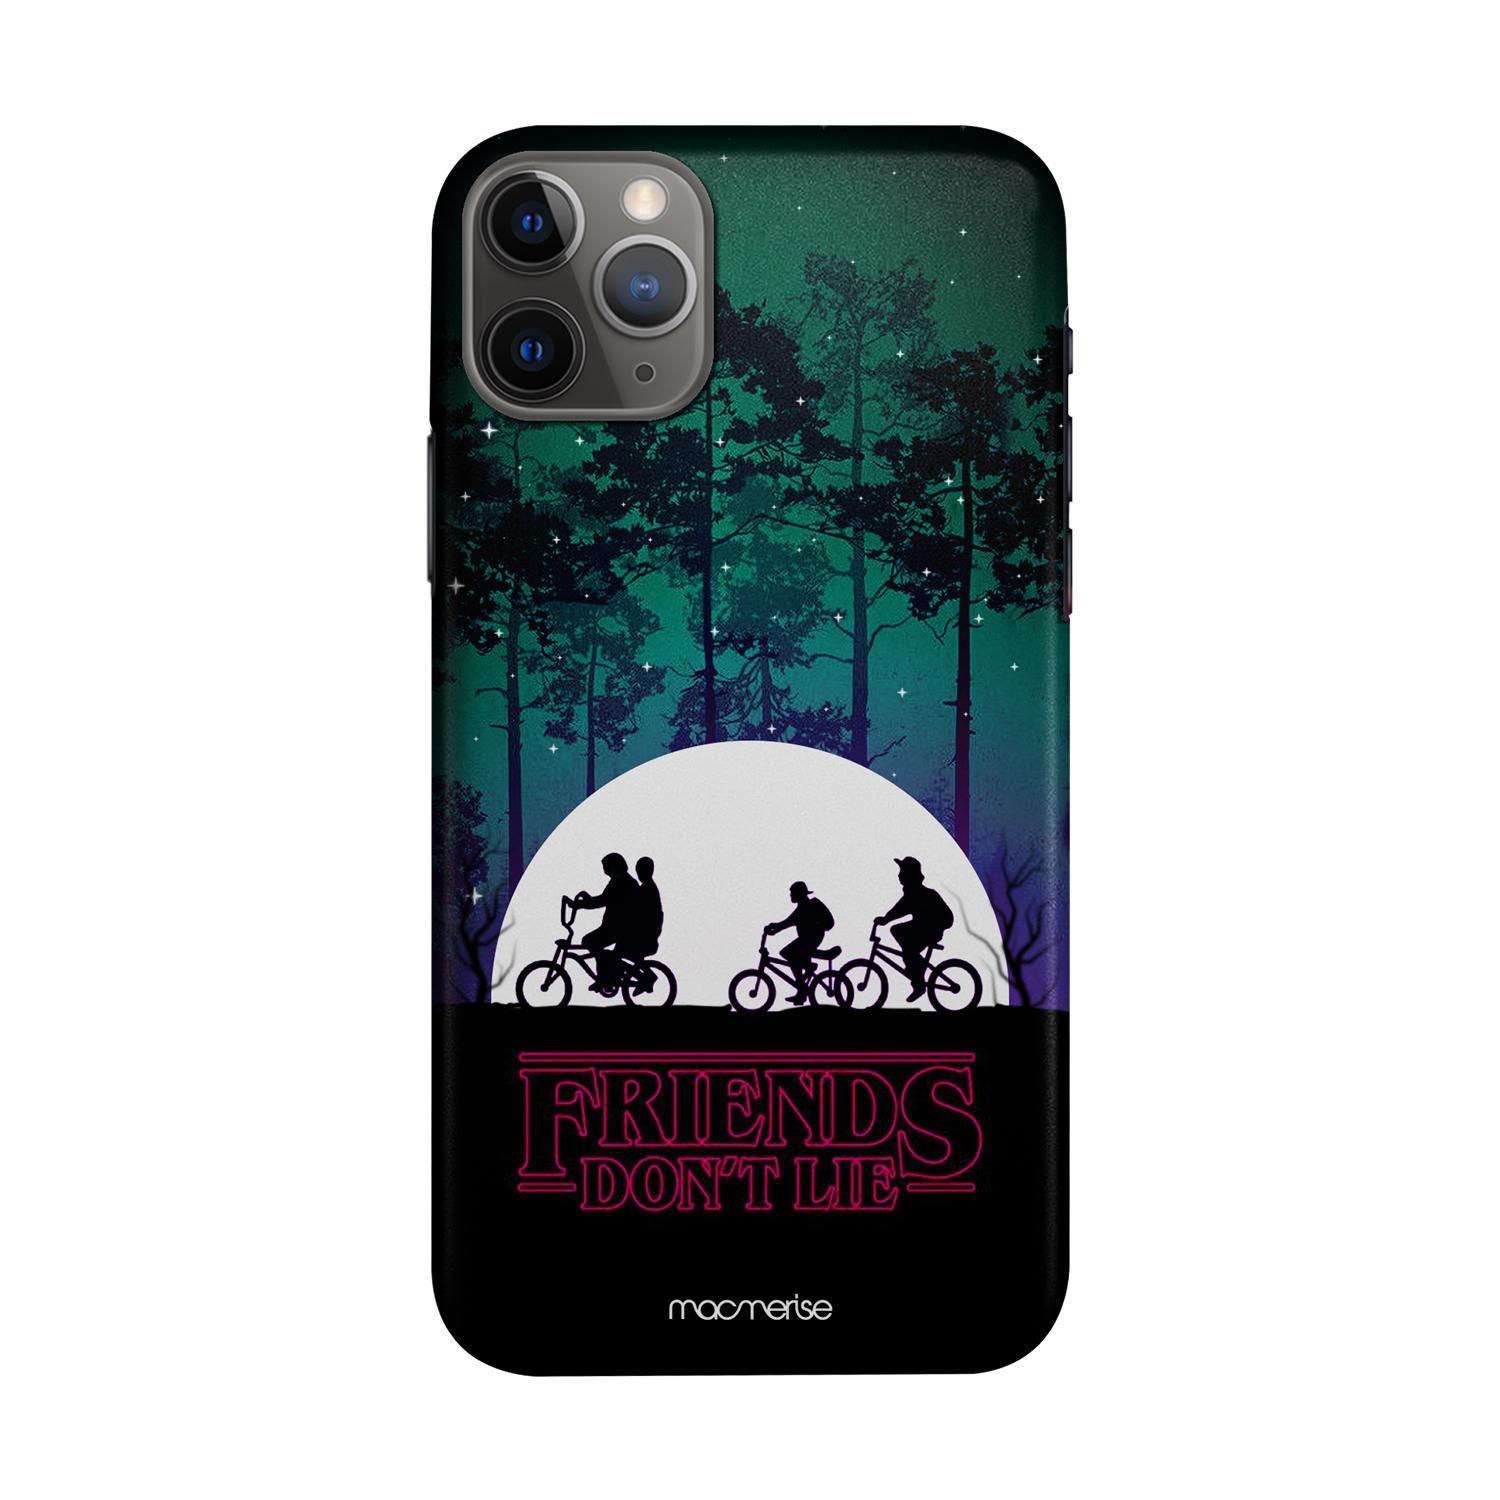 Buy The Gang of Hawkins - Sleek Phone Case for iPhone 11 Pro Max Online